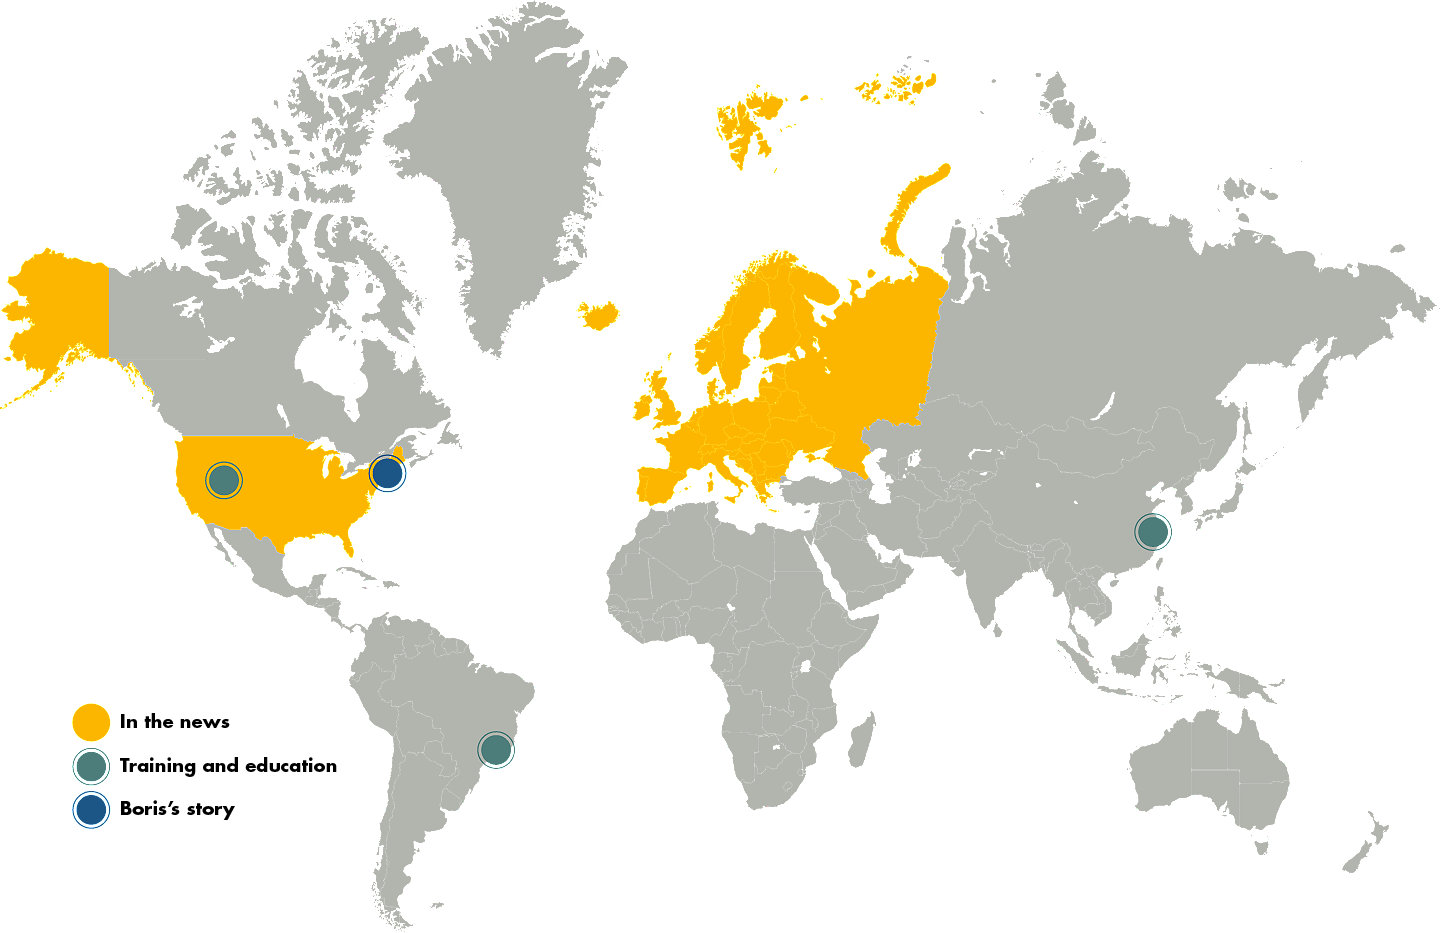 Map of Stryker's global impact and news